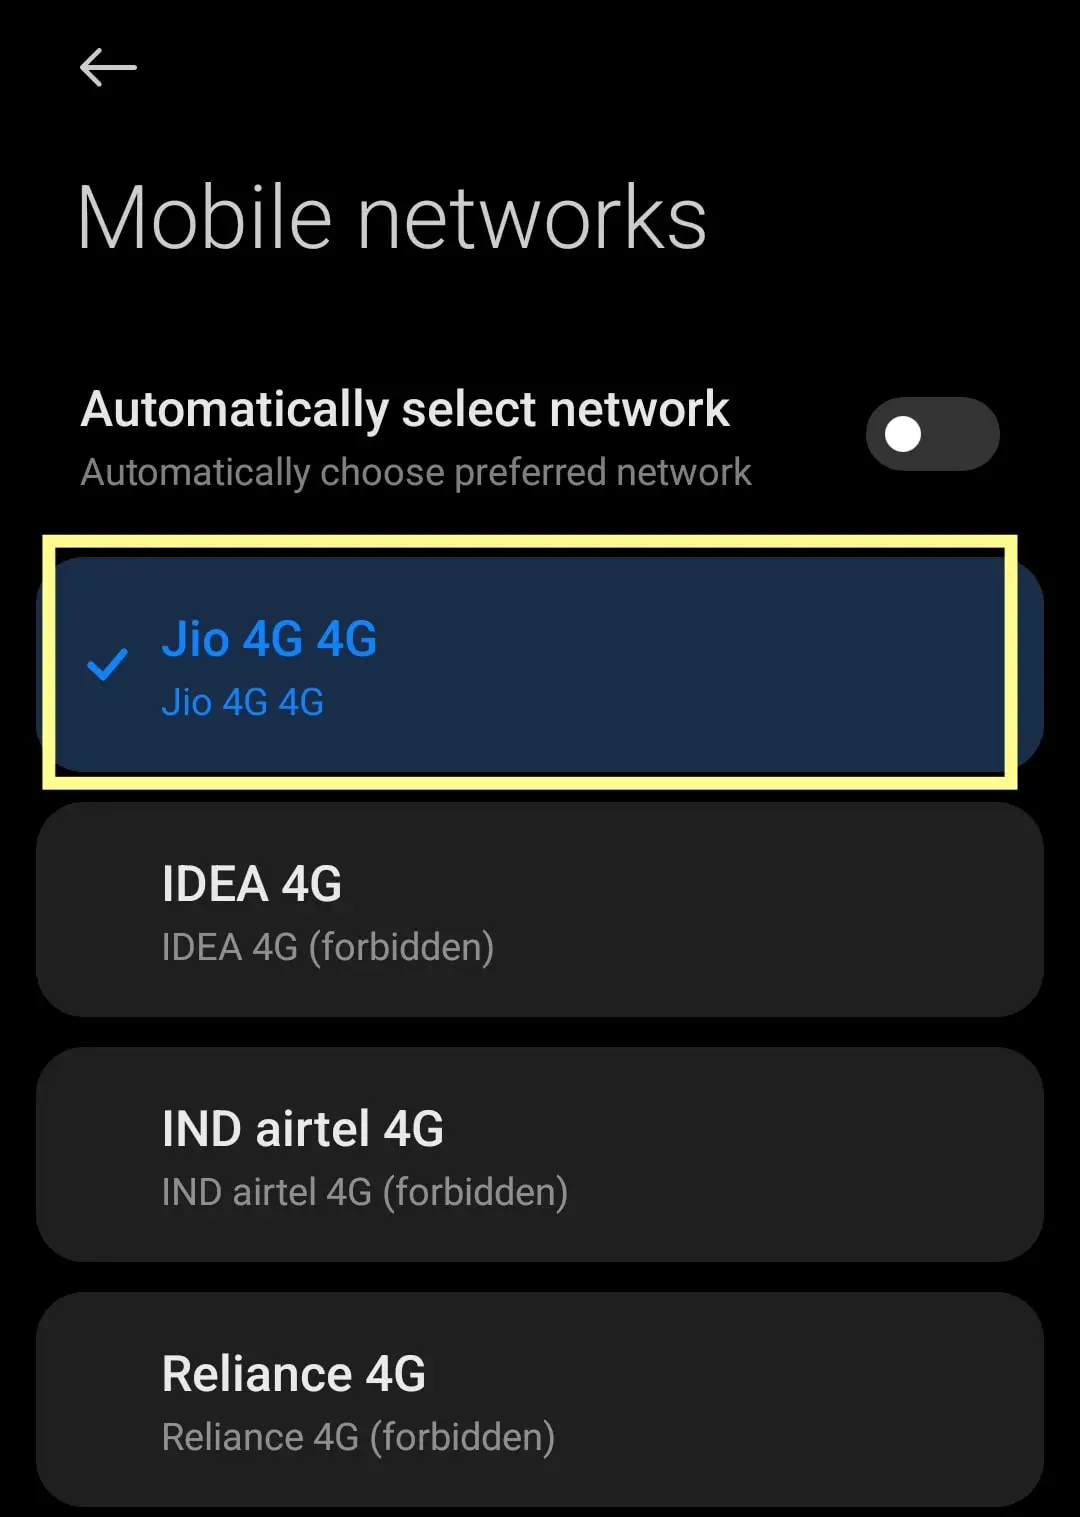 Not Registered On Network Jio